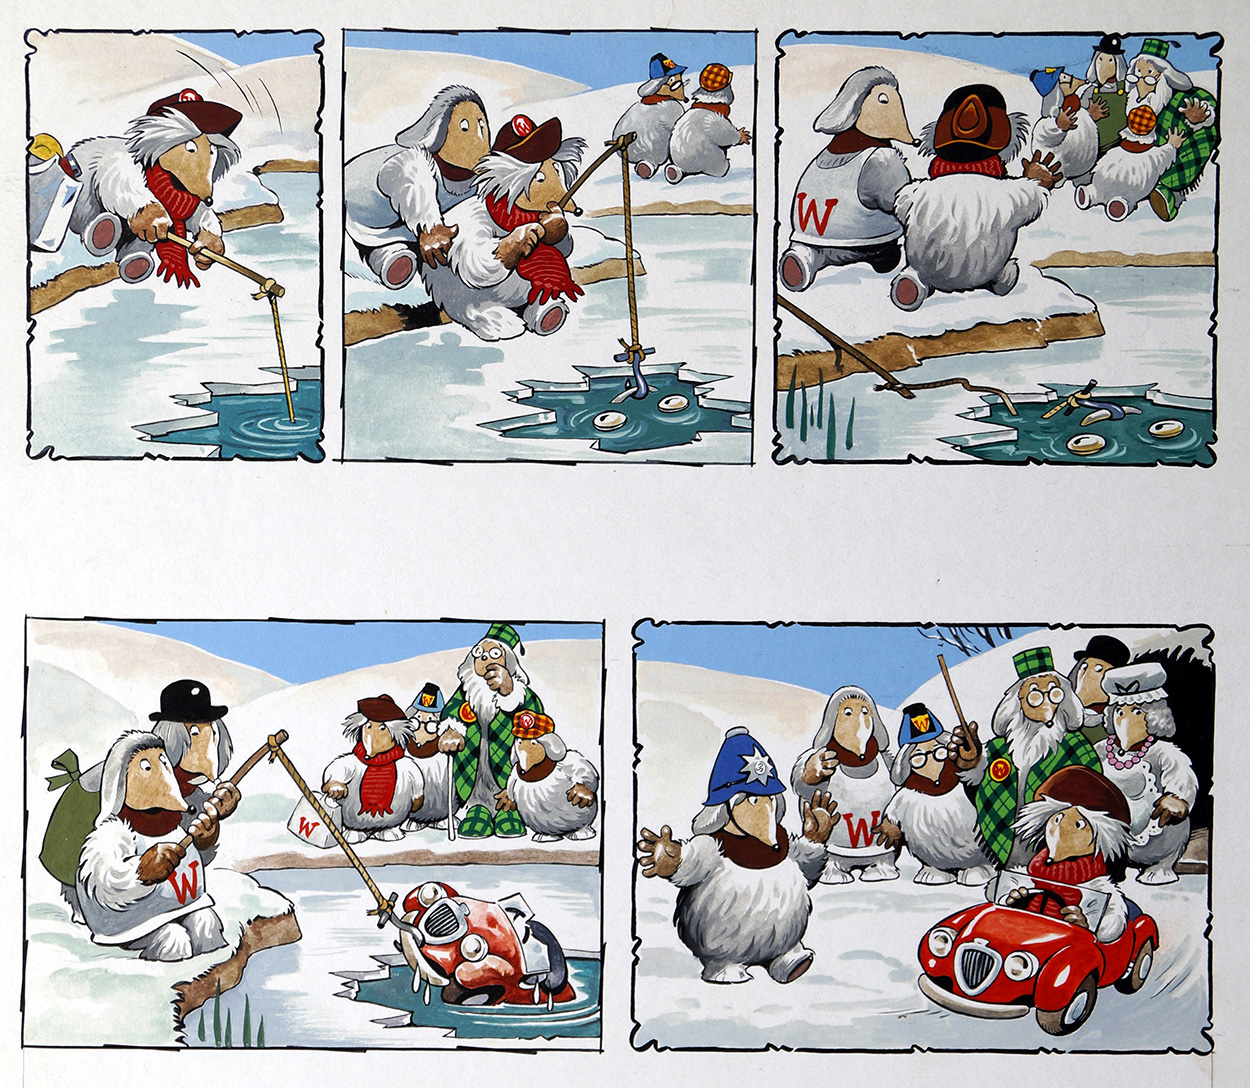 The Wombles - Go Fishing (Original) art by The Wombles (Blasco) Art at The Illustration Art Gallery